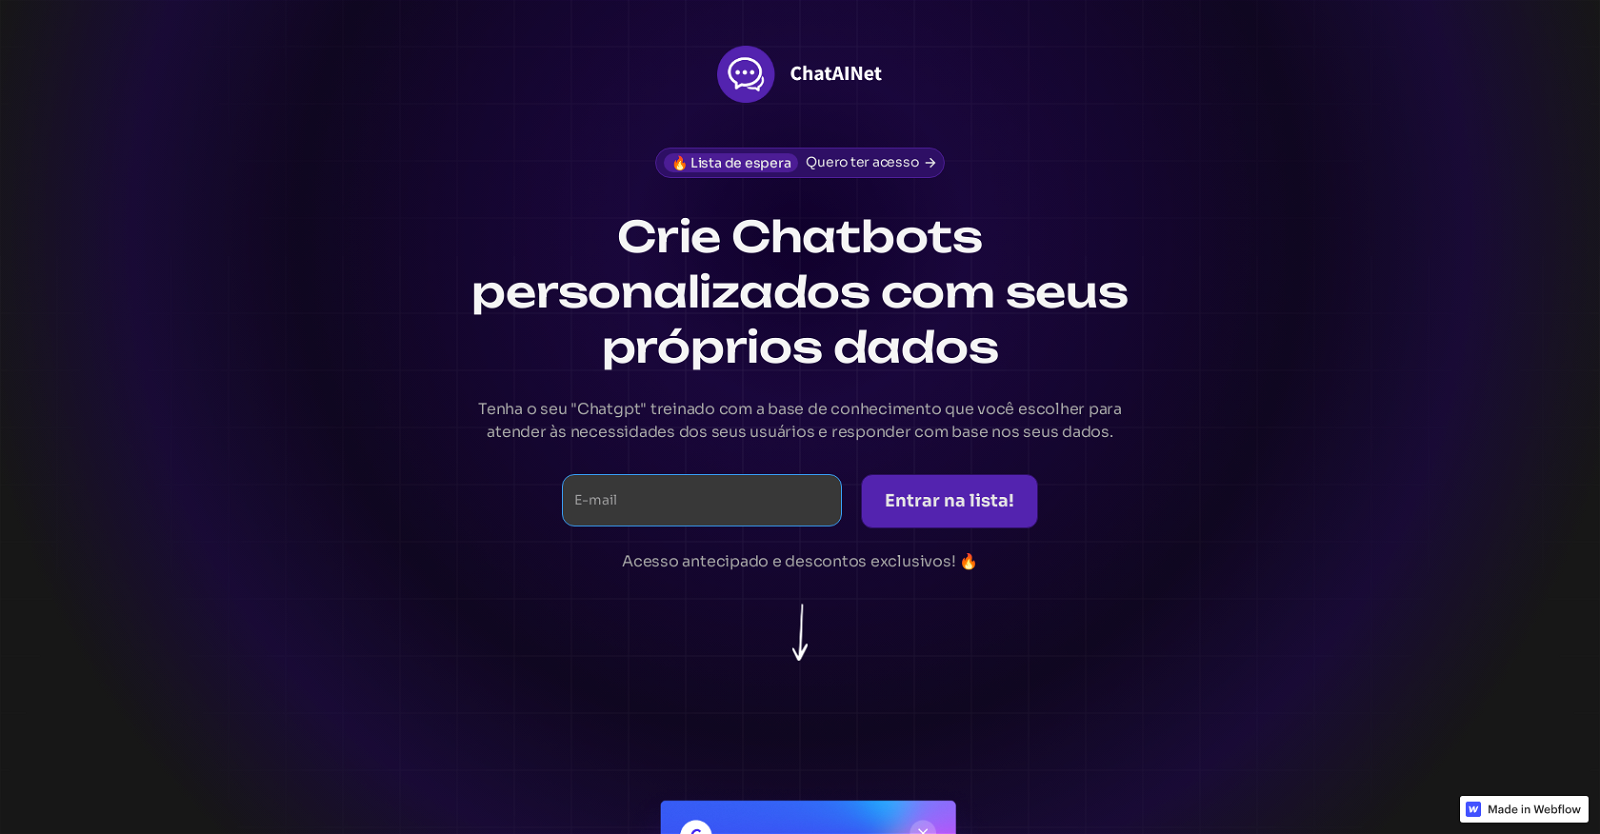 ChatAINet website